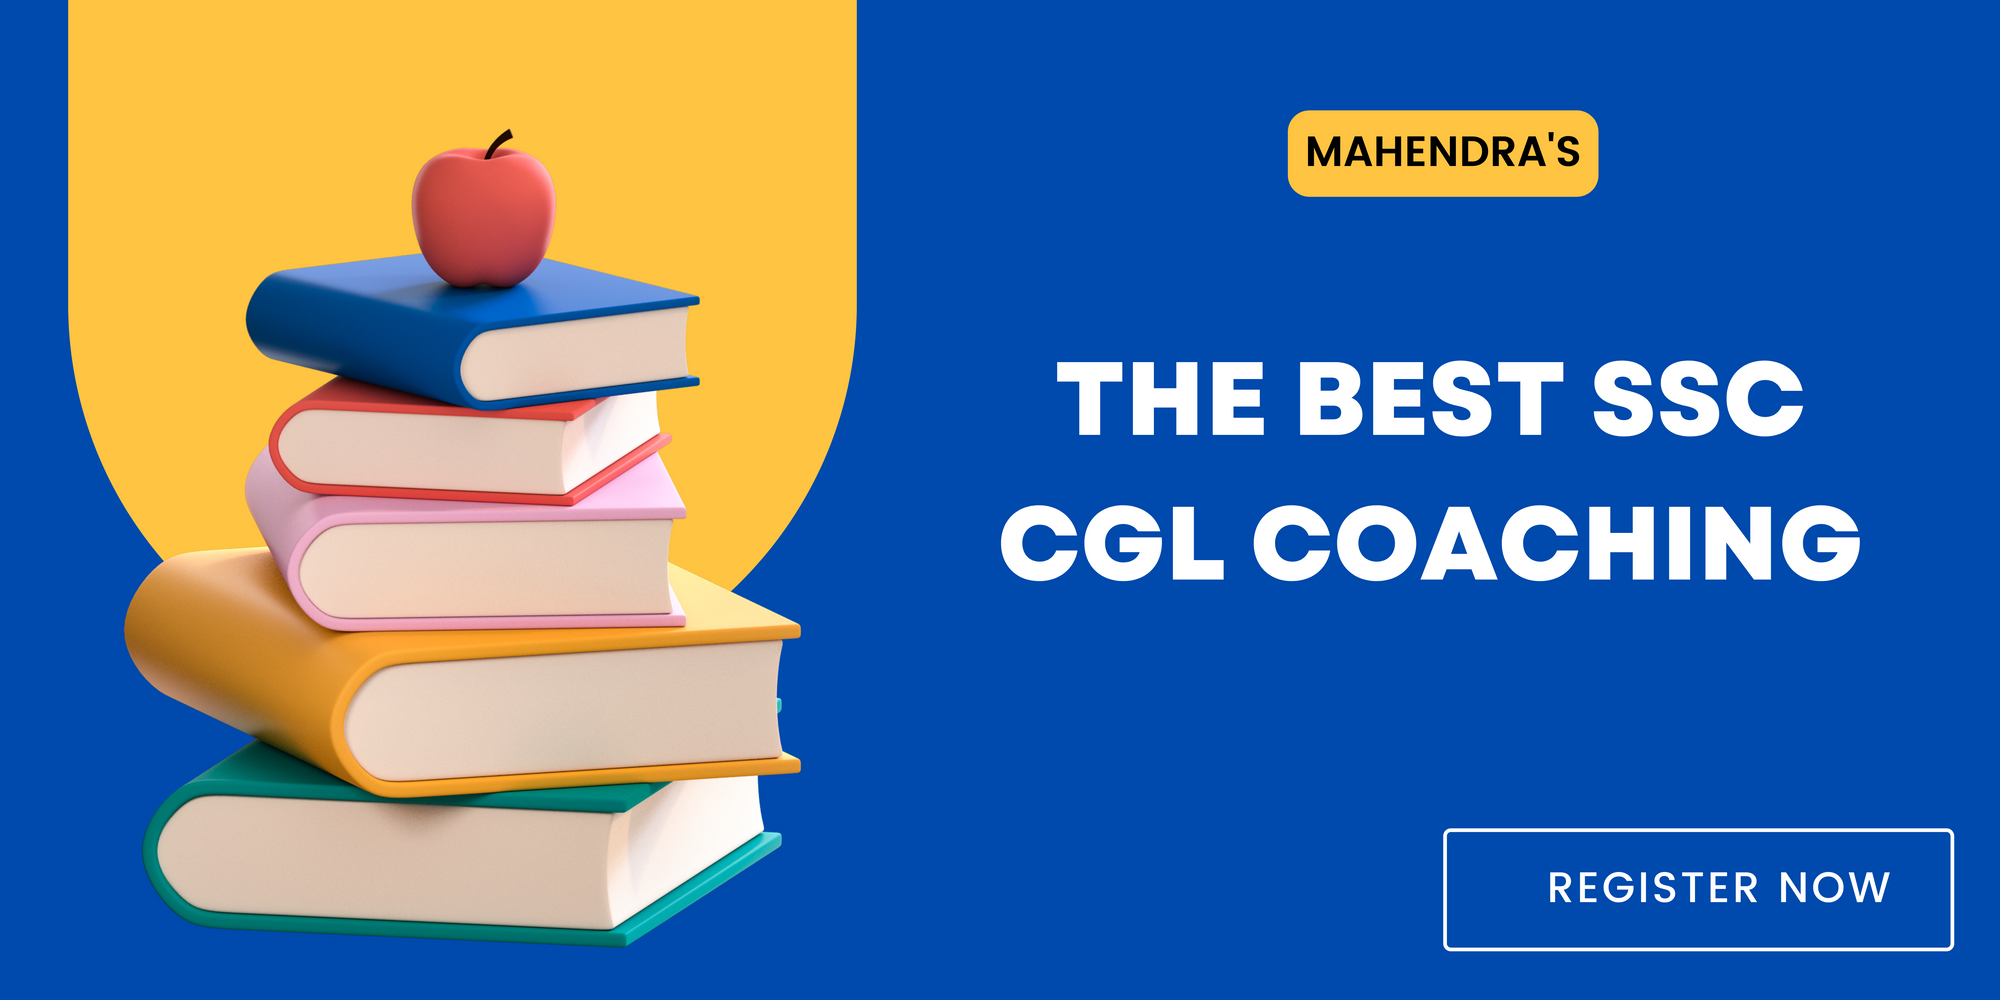 Looking for SSC CGL Online Coaching?